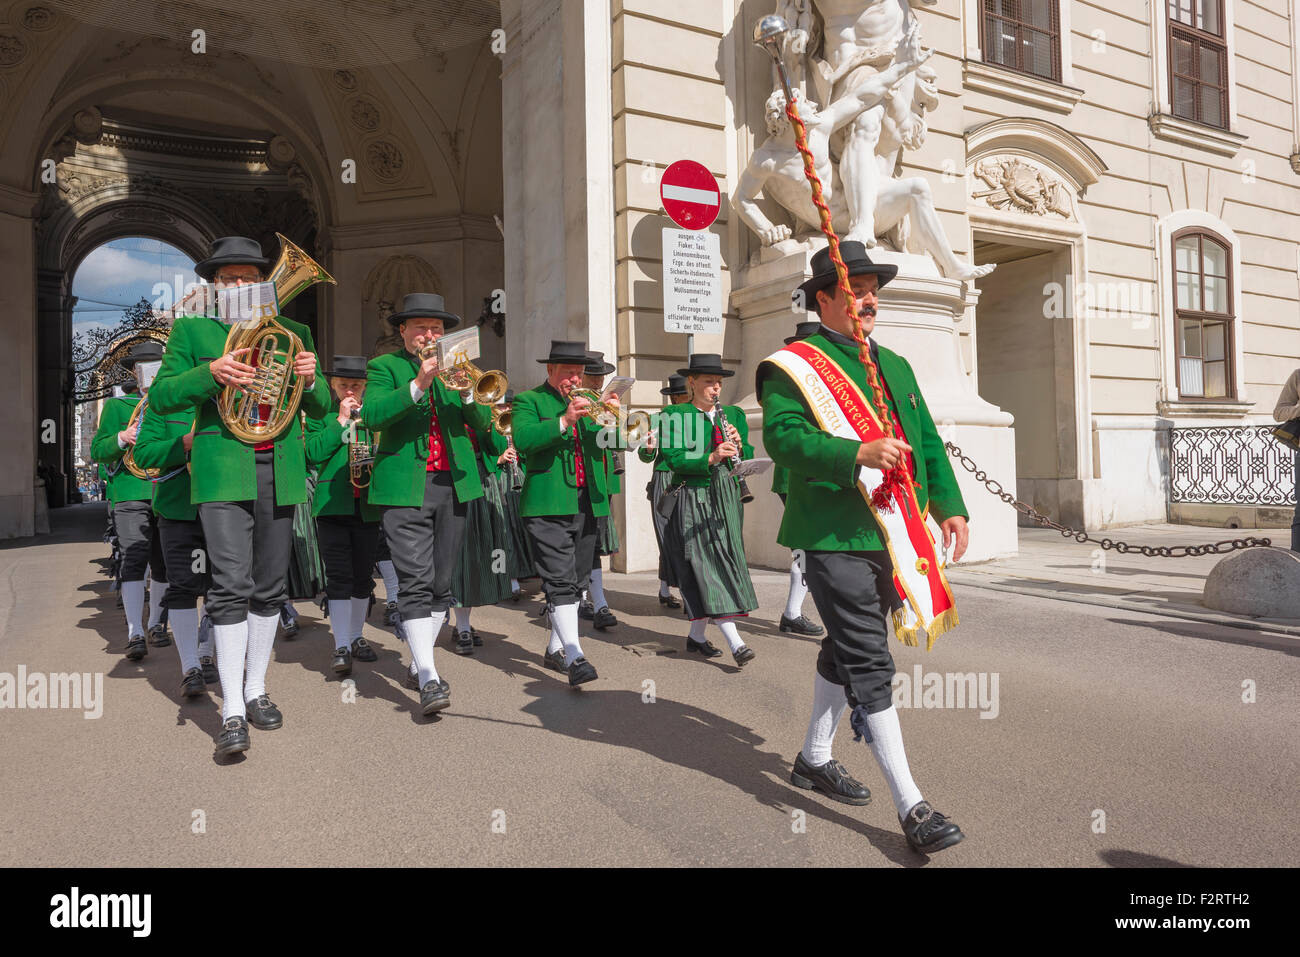 Austria festival, a traditional Tyrolean band enters the courtyard of the Hofburg Palace during national harvest festival celebrations in Vienna. Stock Photo